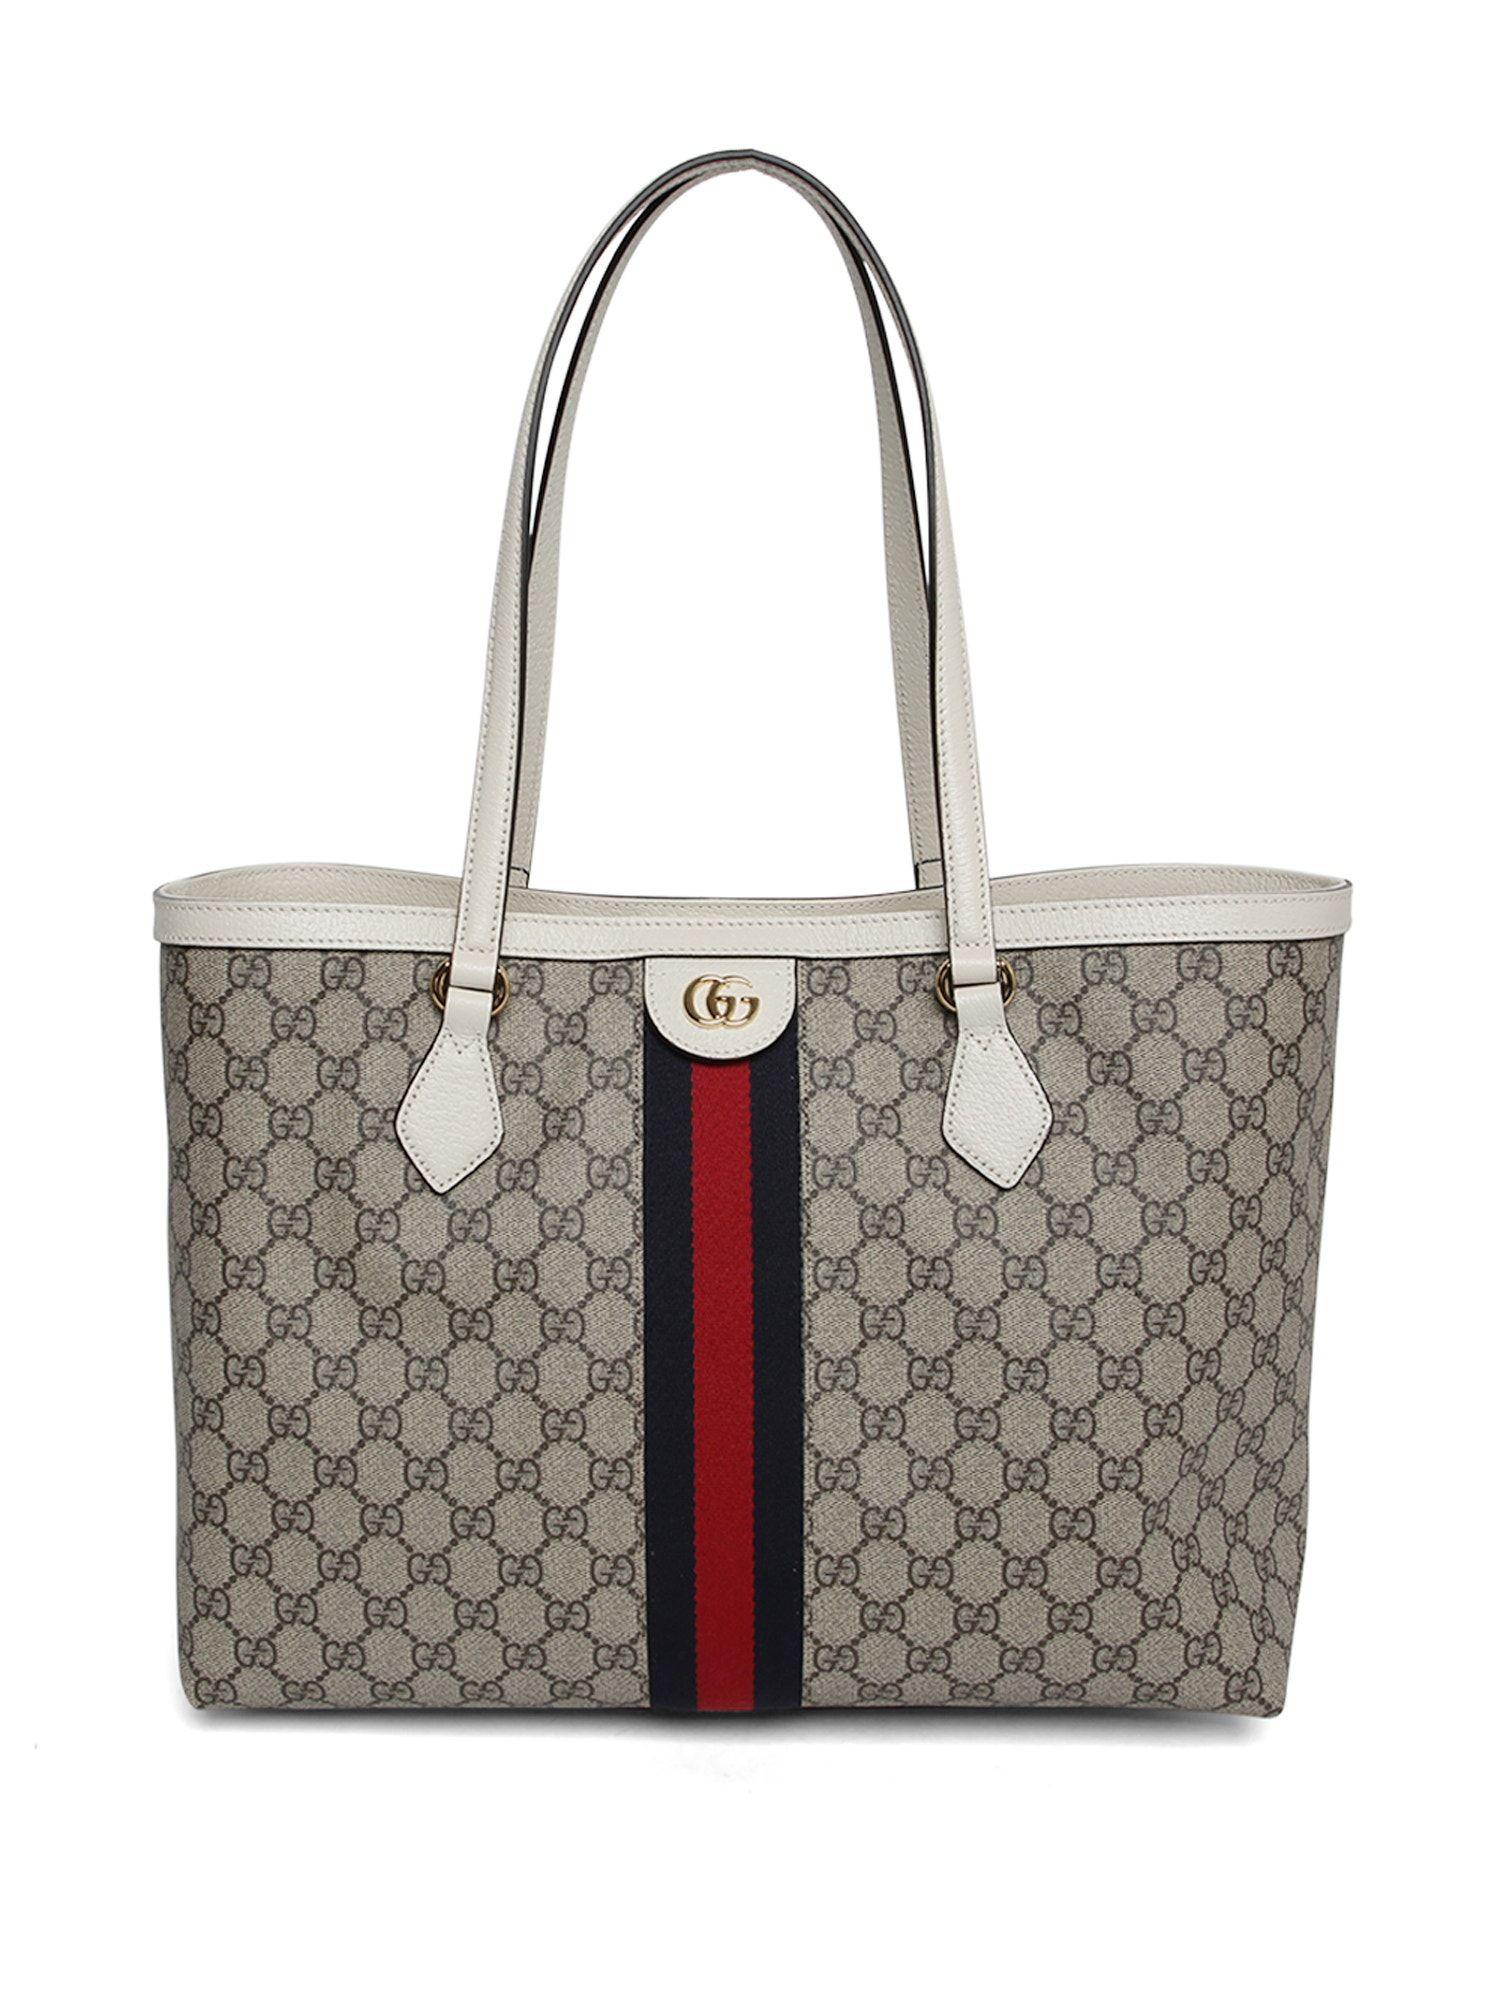 Gucci Ophidia Tote Handbag in White | Lyst